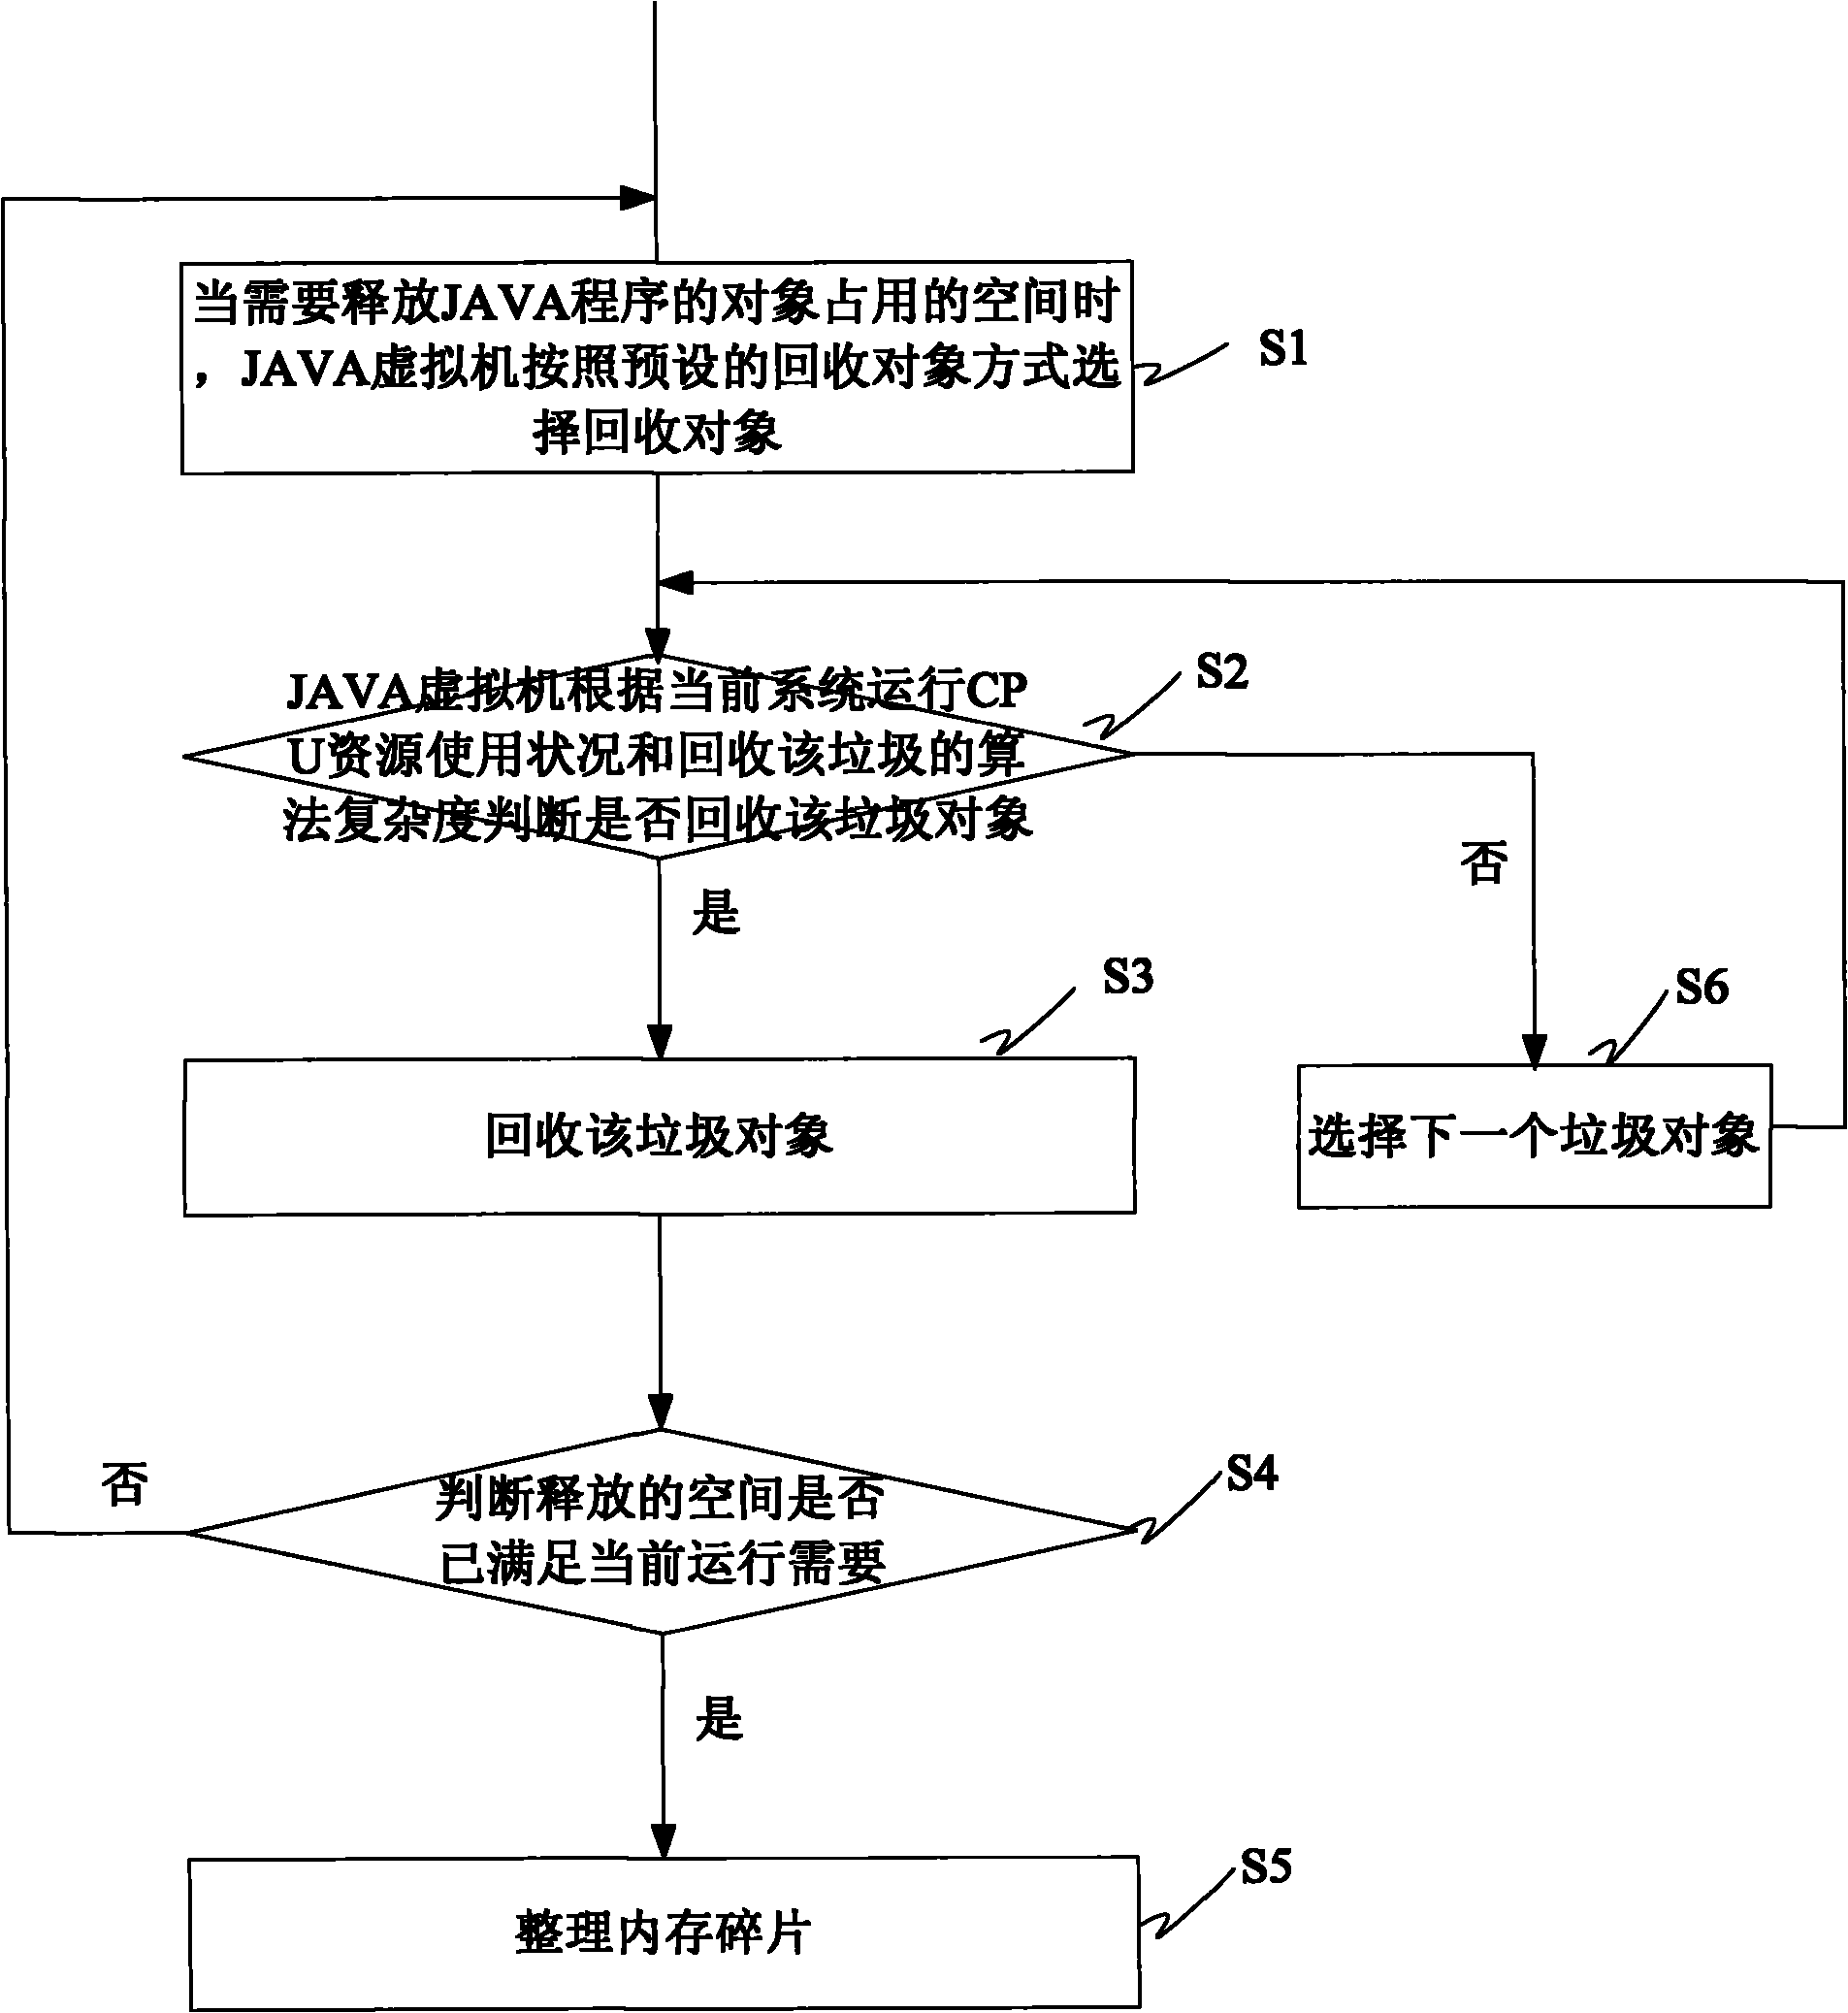 System and method for recycling garbage object in self-adaptive way